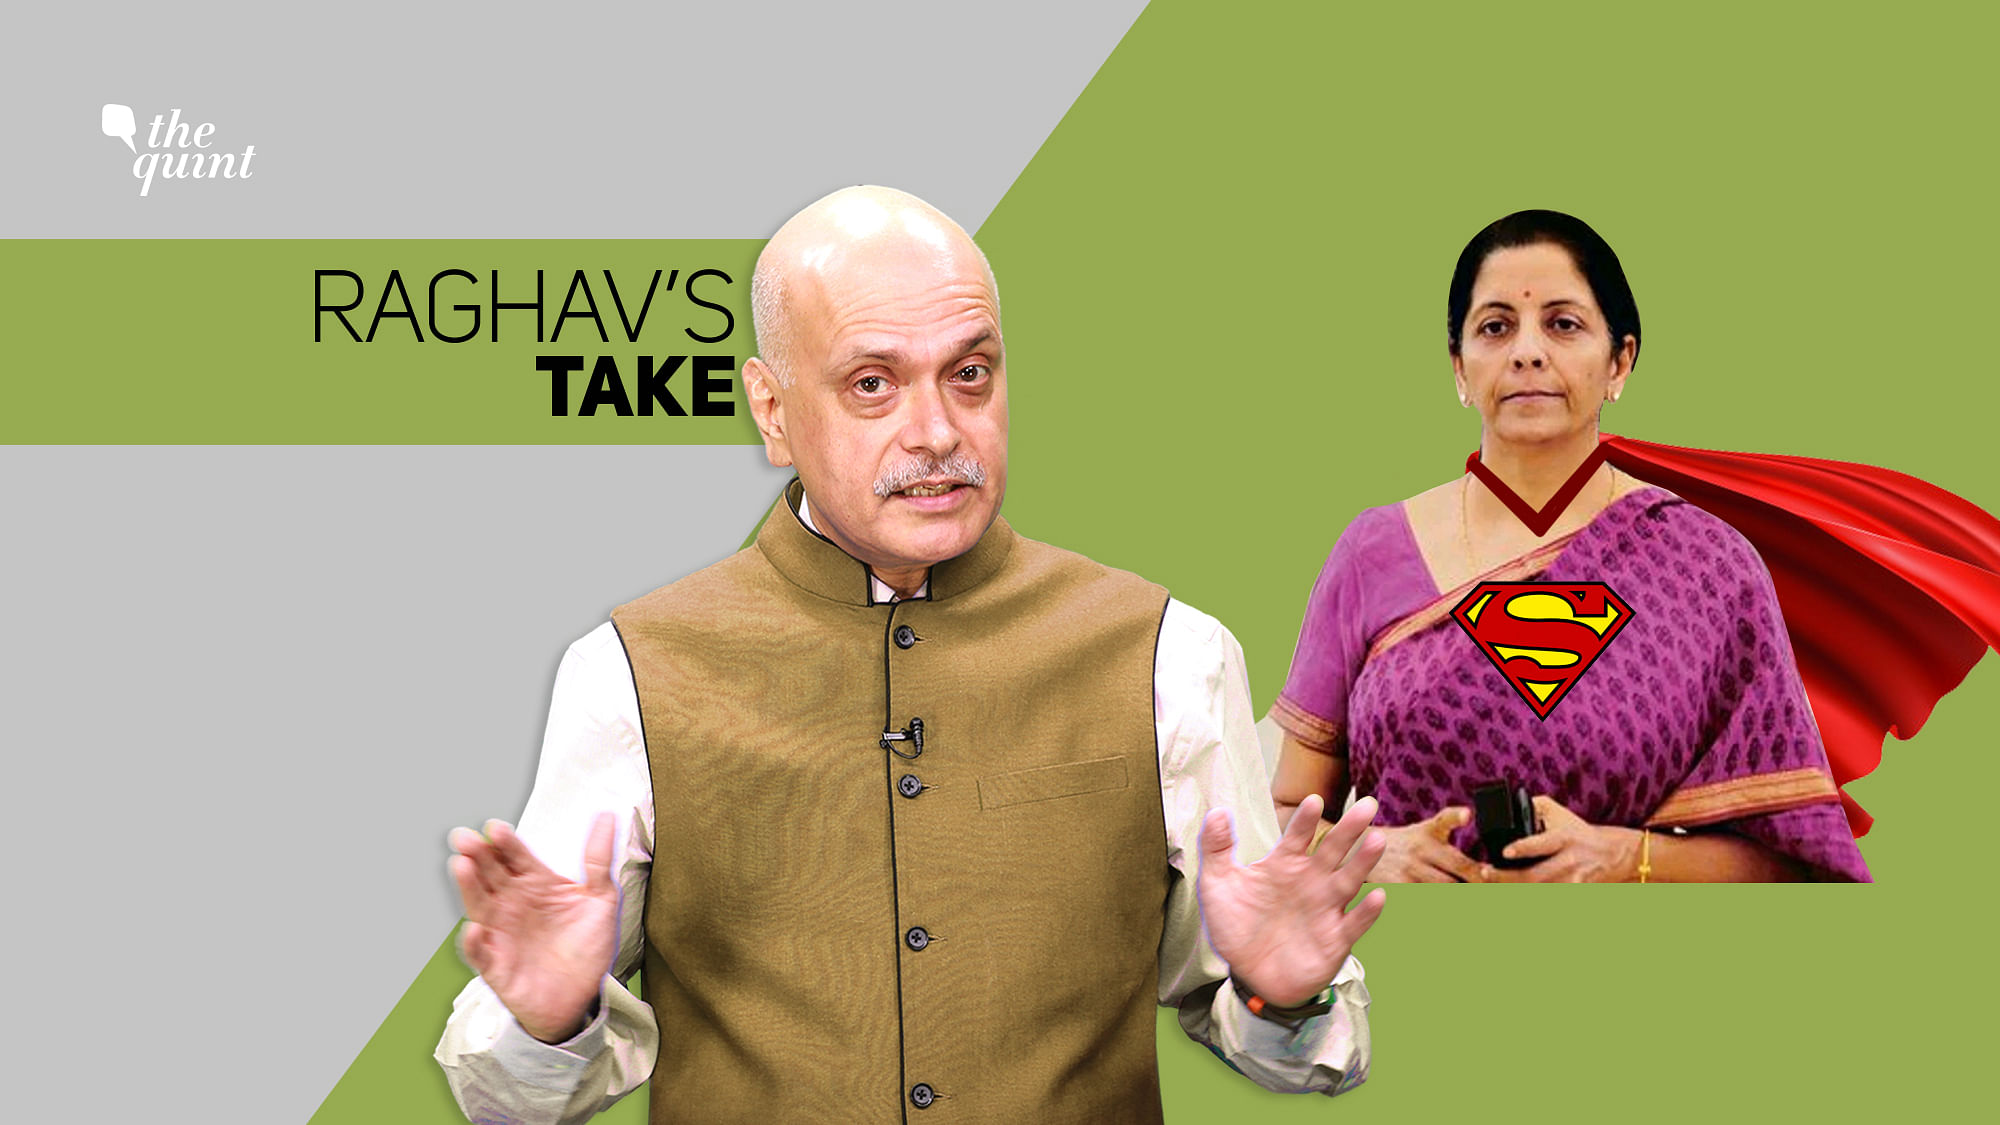 Image of <b>The Quint’</b>s Editor &amp; Co-Founder Raghav Bahl, and stylised image of Finance Minister Nirmala Sitharaman, used for representational purposes.